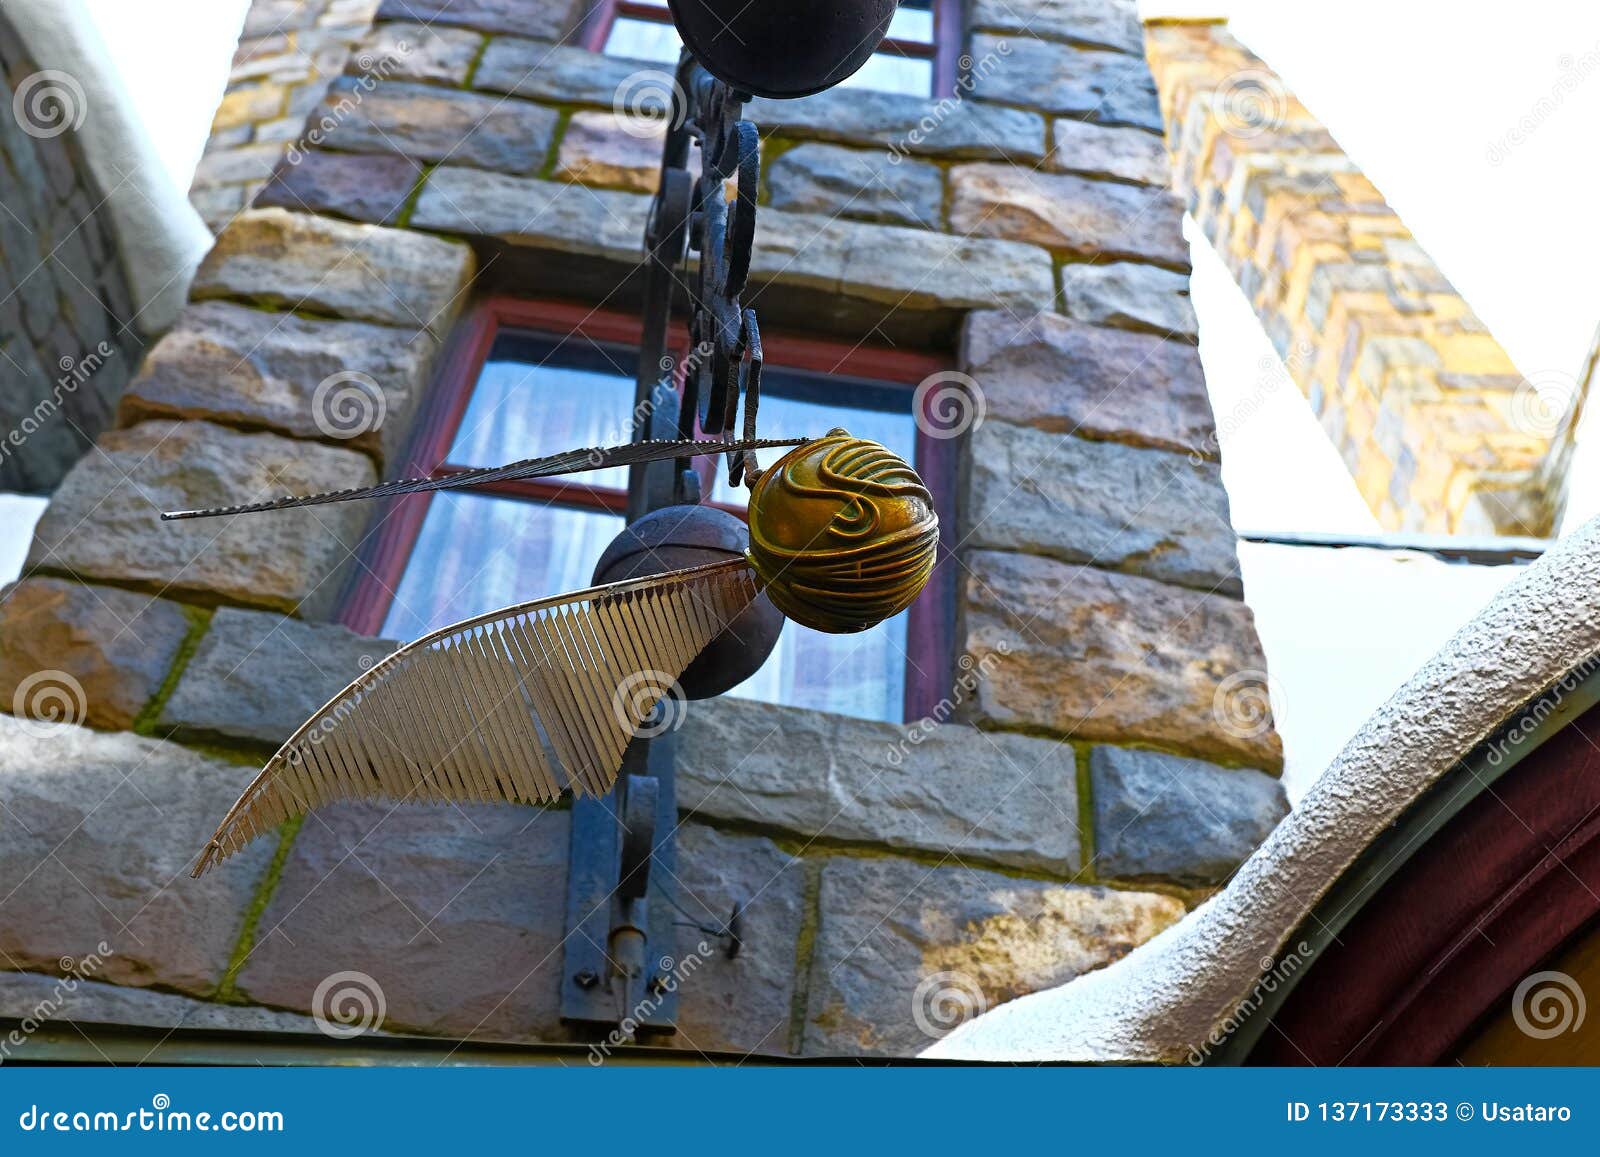 Download Display Of Quidditch Balls At The Wizarding World Of Harry ...